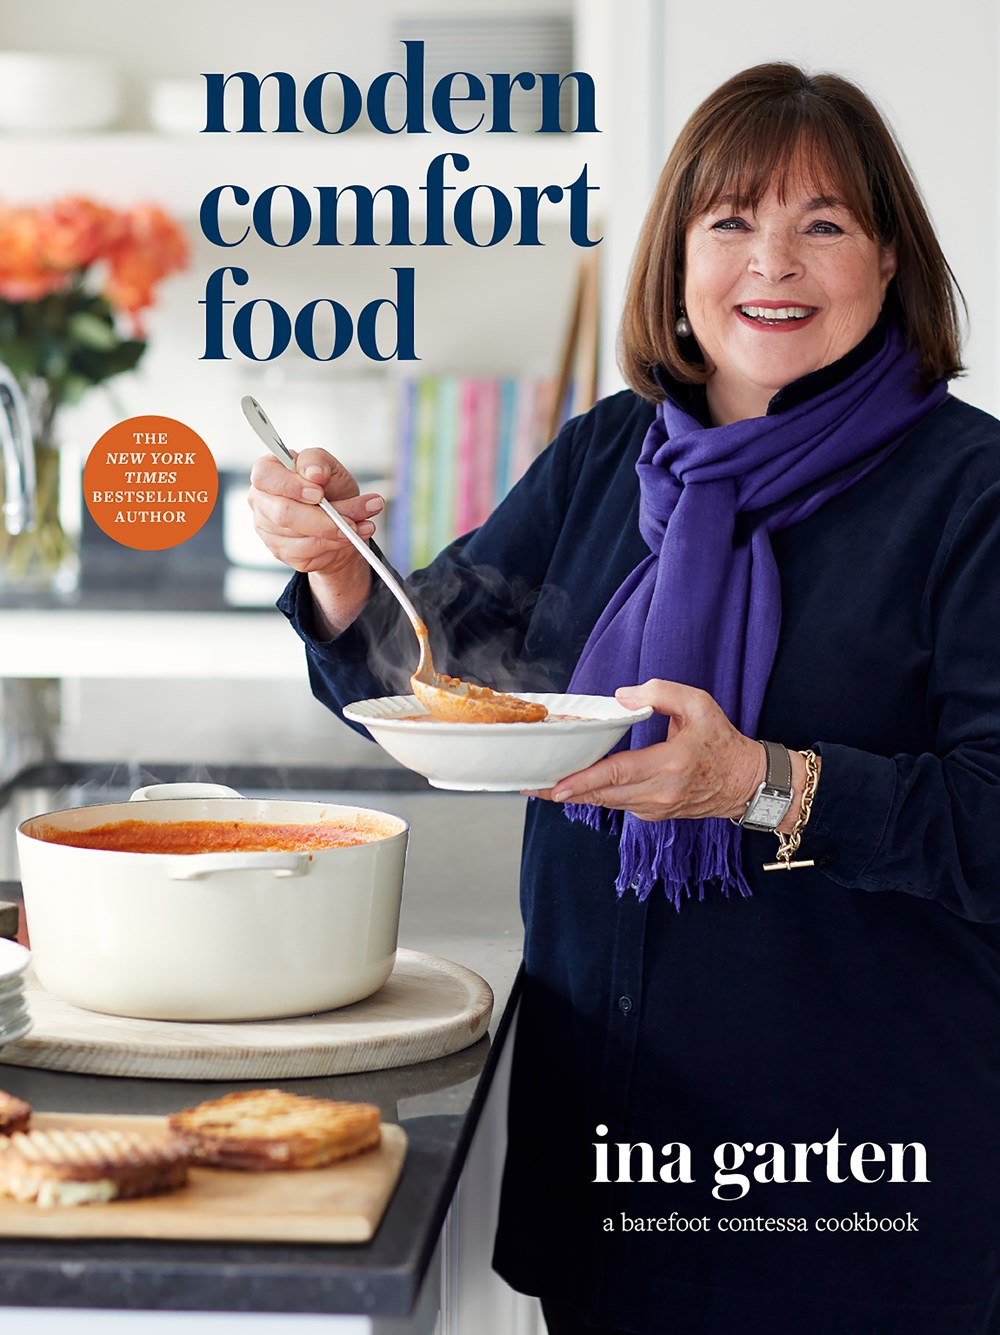 Cooking Best-Sellers, May 2021 | The Most In-Demand in Libraries & Bookstores